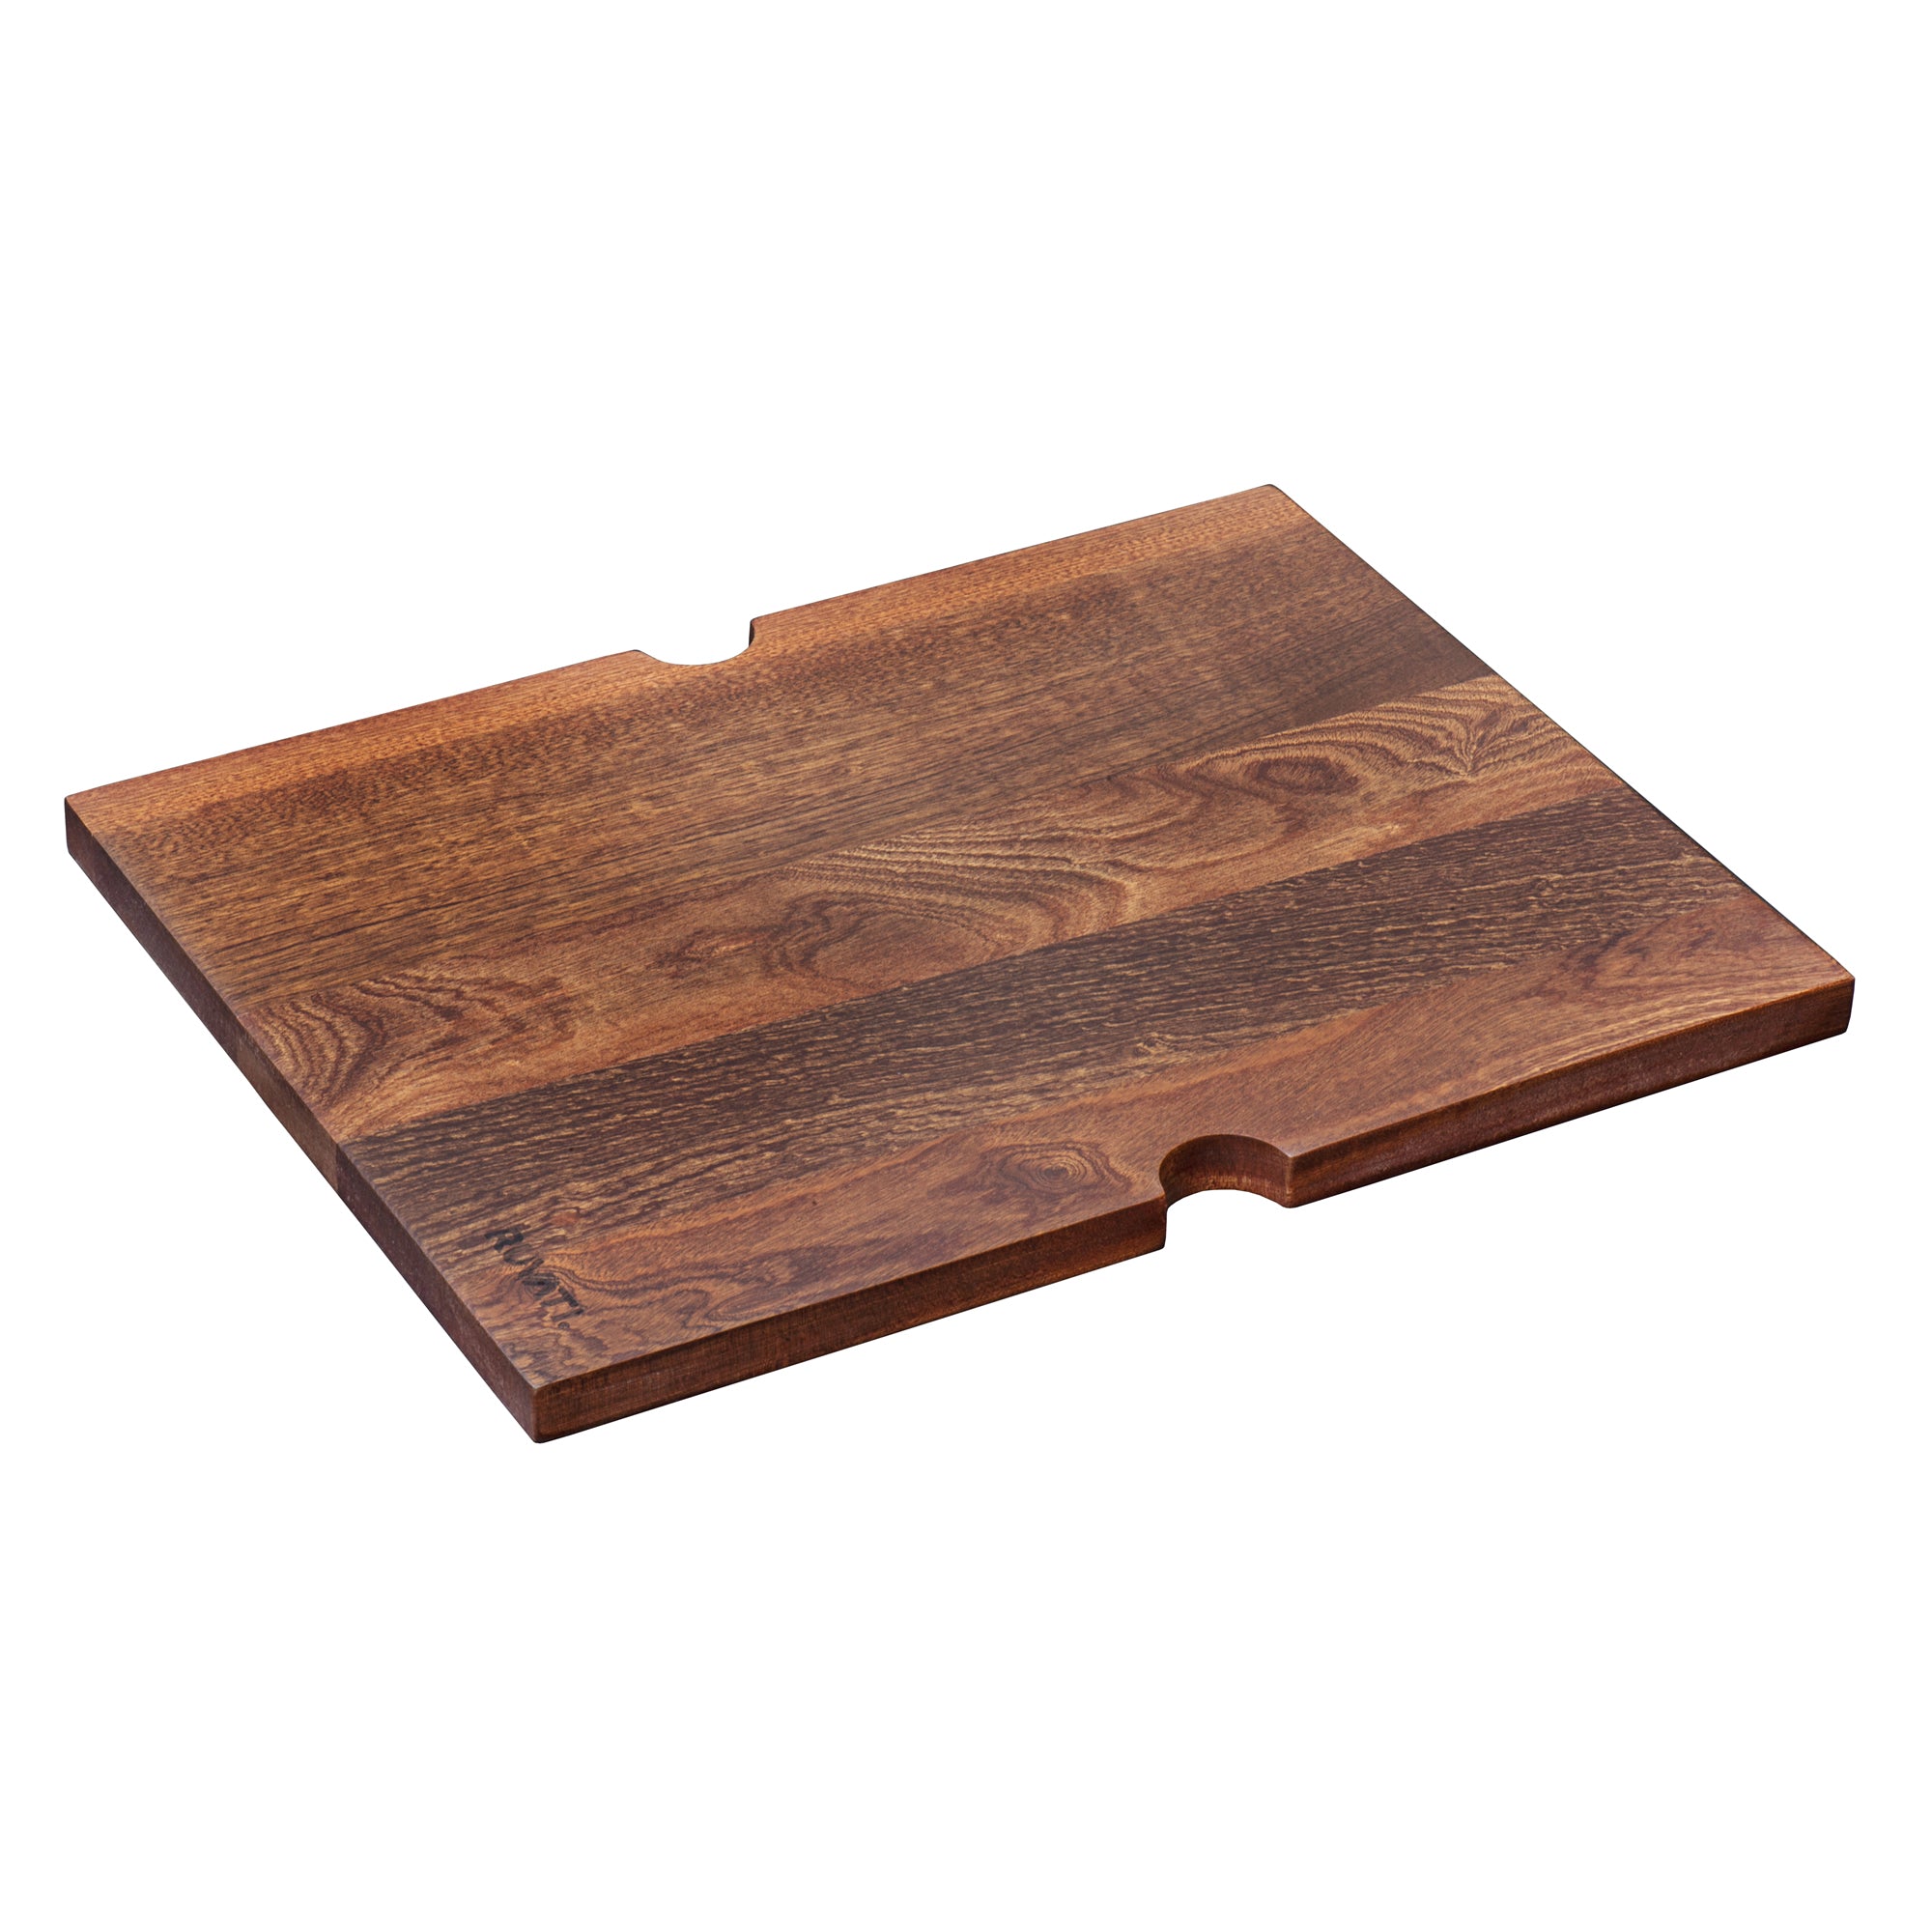 Ruvati 14 x 17 inch Solid Wood Replacement Cutting Board Sink Cover for RVH8304 workstation sink – RVA1204